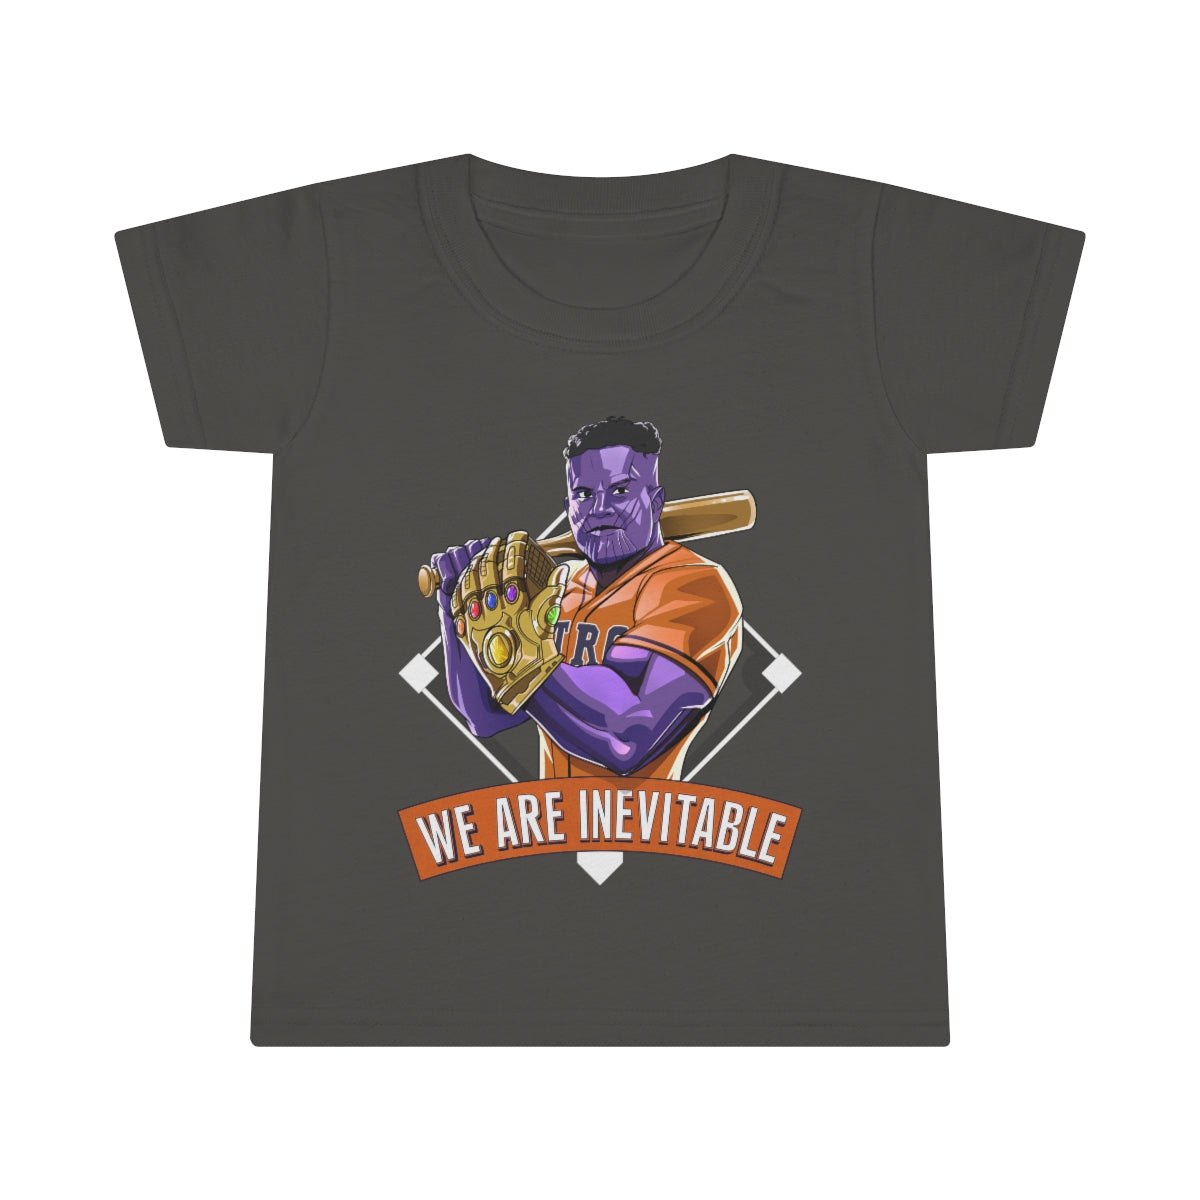 Destiny Arrives All The Same - Toddler Tee Charcoal / 2T Kids Clothes